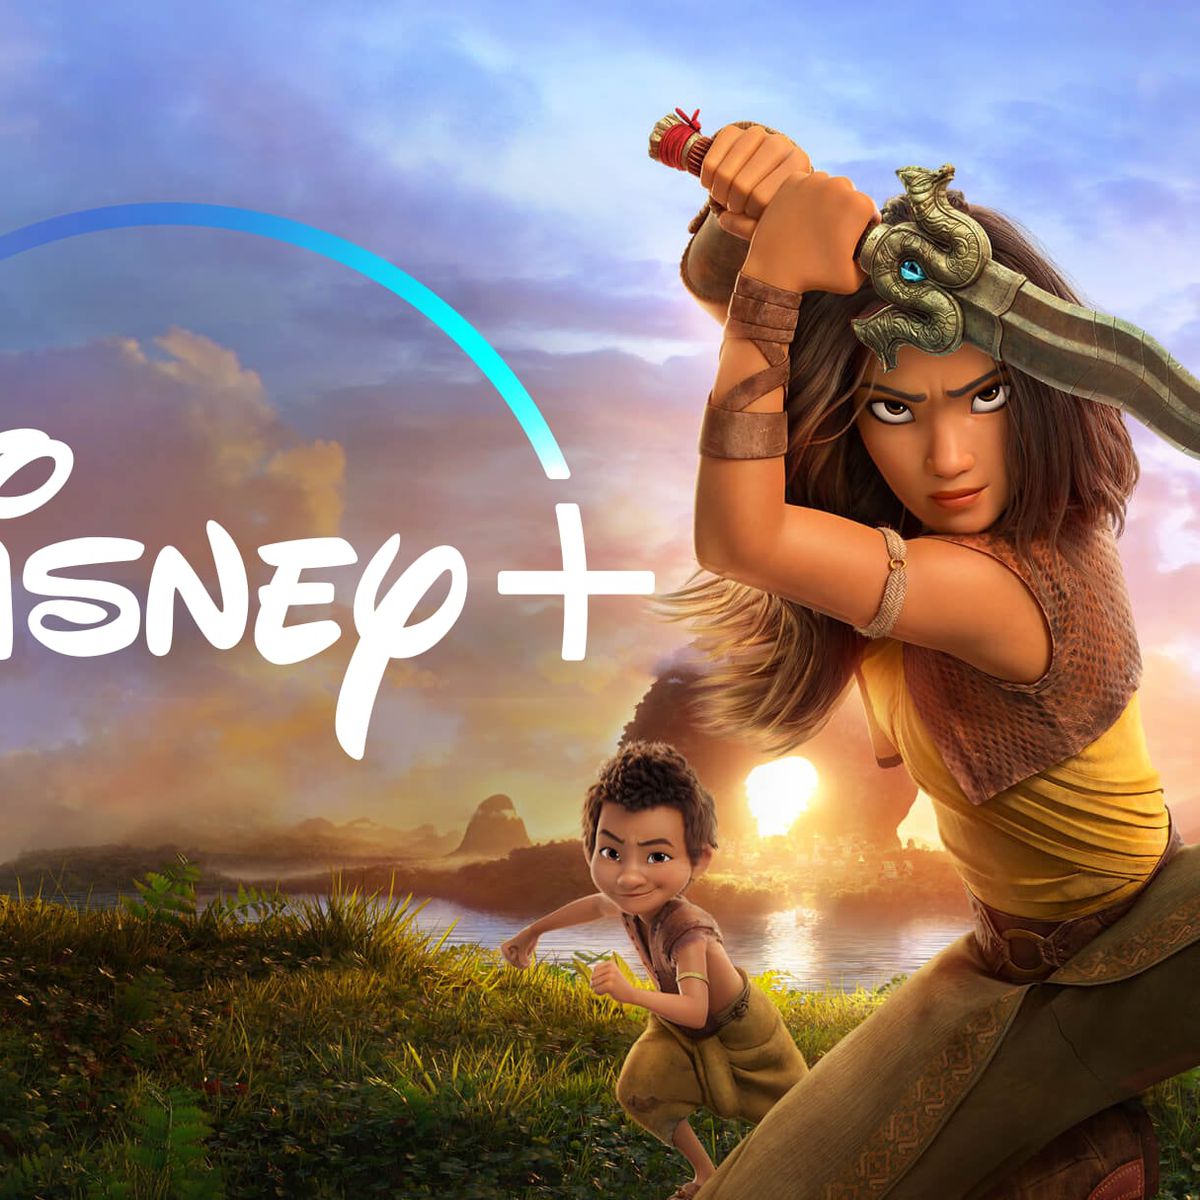 Disney+ Won't Offer a Cheaper Ad-Supported Plan Anytime Soon - MacRumors